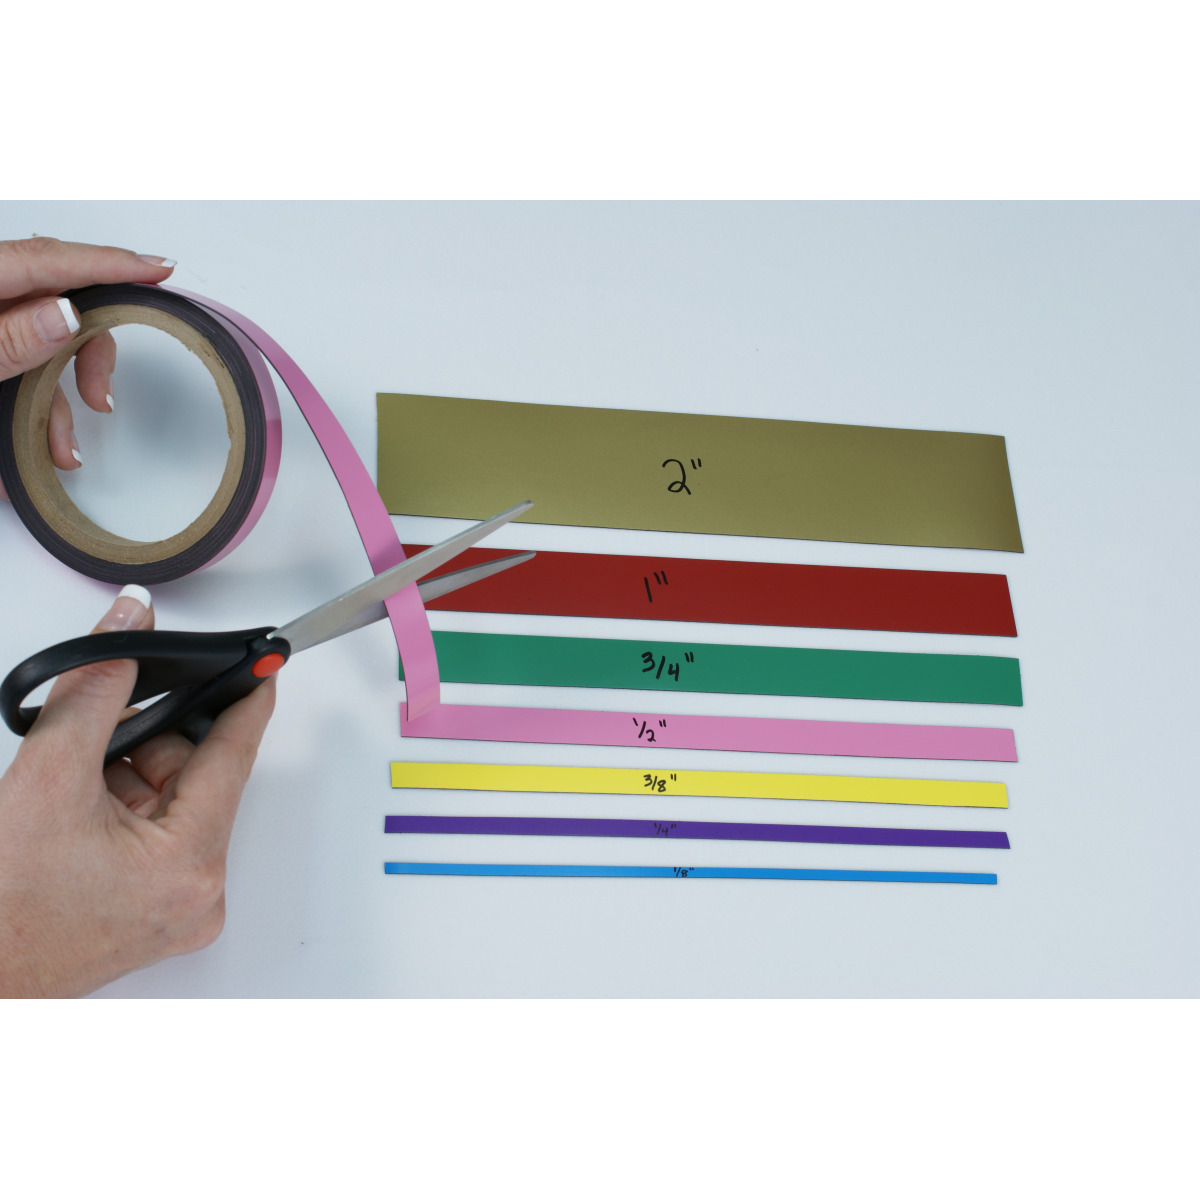 Rolls of colored magnetic strips you can cut to length simply with scissors